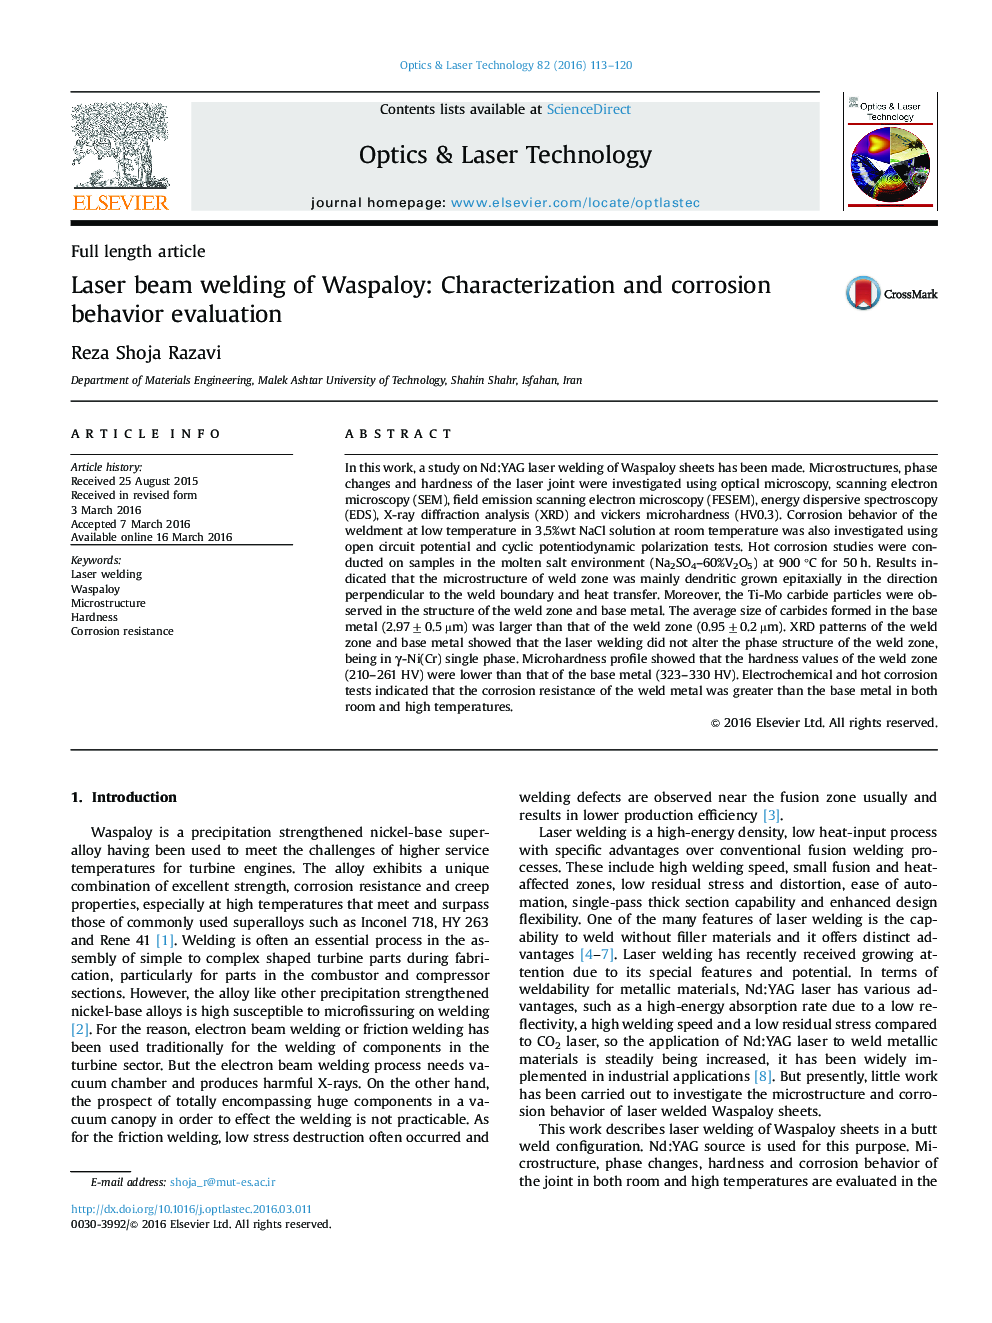 Laser beam welding of Waspaloy: Characterization and corrosion behavior evaluation